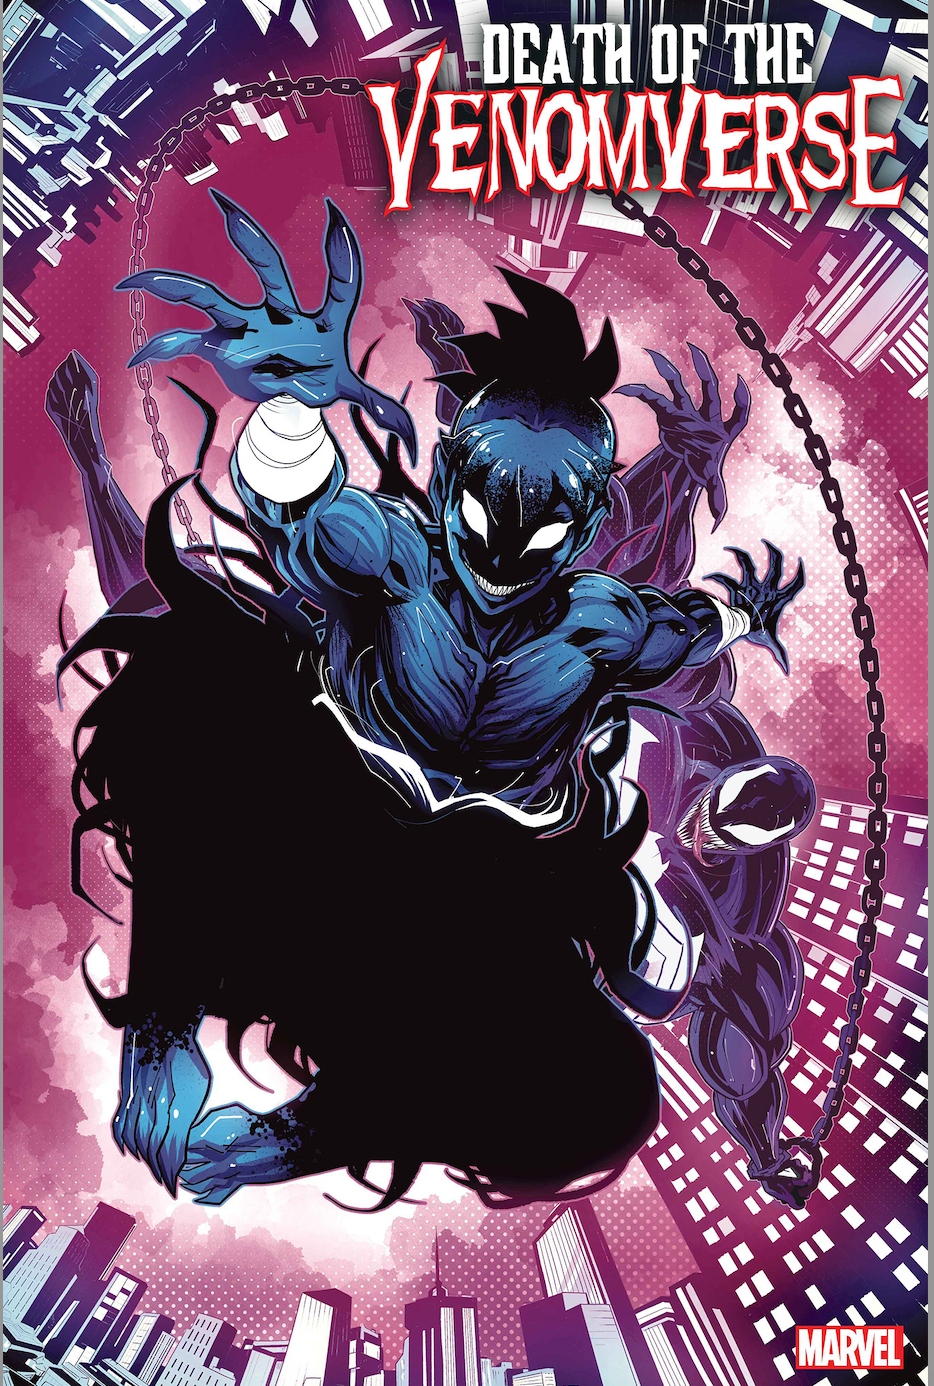 DEATH OF THE VENOMVERSE 2 LUCIANO VECCHIO KID VENOM VARIANT (11x Bundle) (10x of this cover and 1:10)